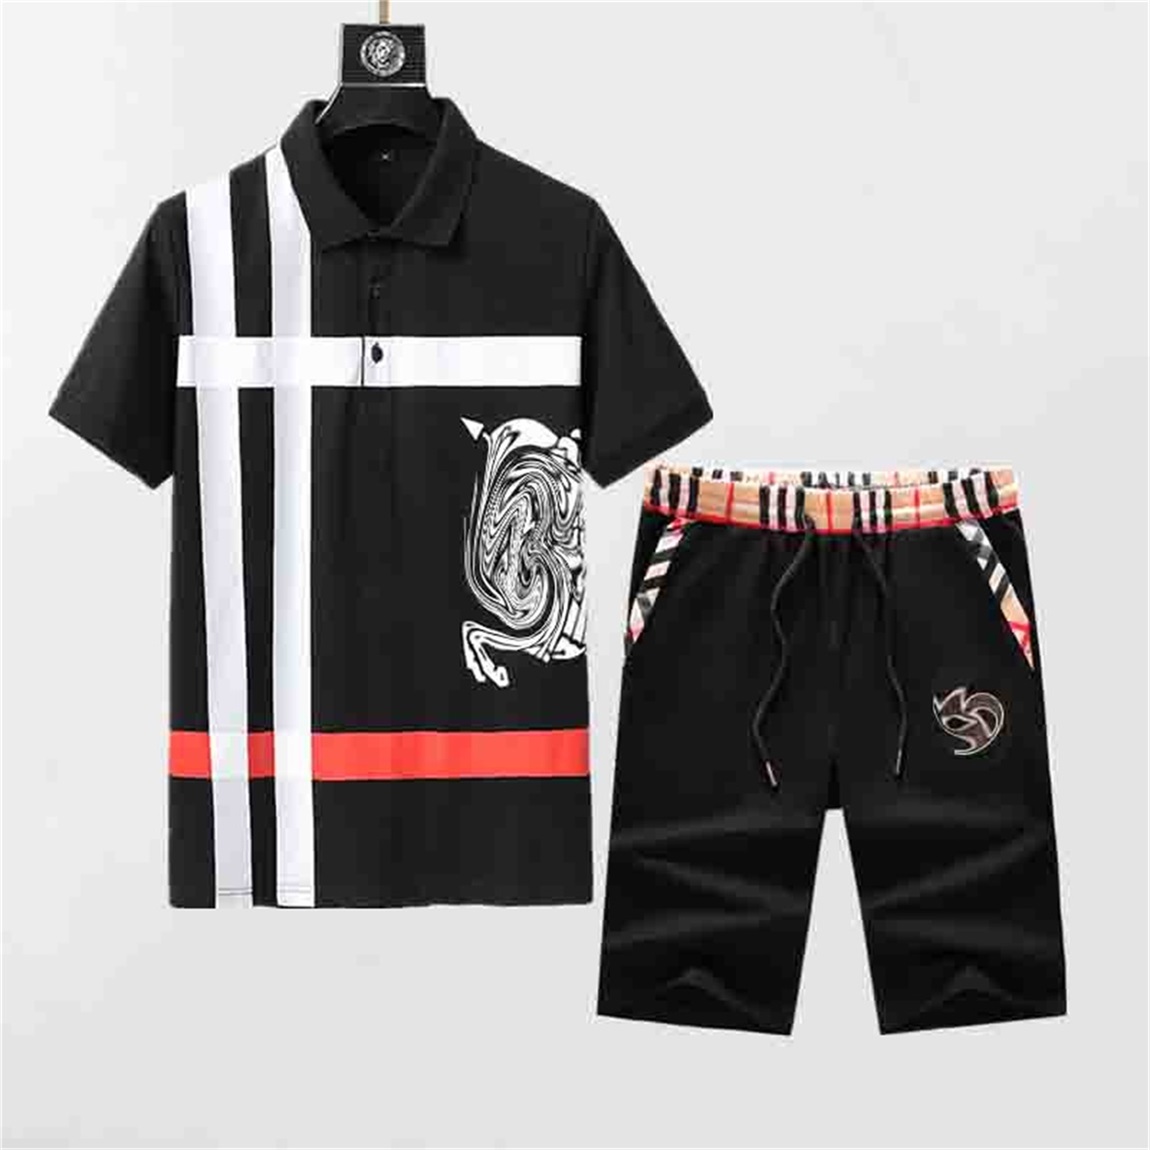 

Mens Beach Designers Tracksuits Summer Suits 21ss Fashion T Shirt Seaside Holiday Shirts Shorts Sets Man S 2021 Luxury Set Outfits Sportswears A-04, Customize